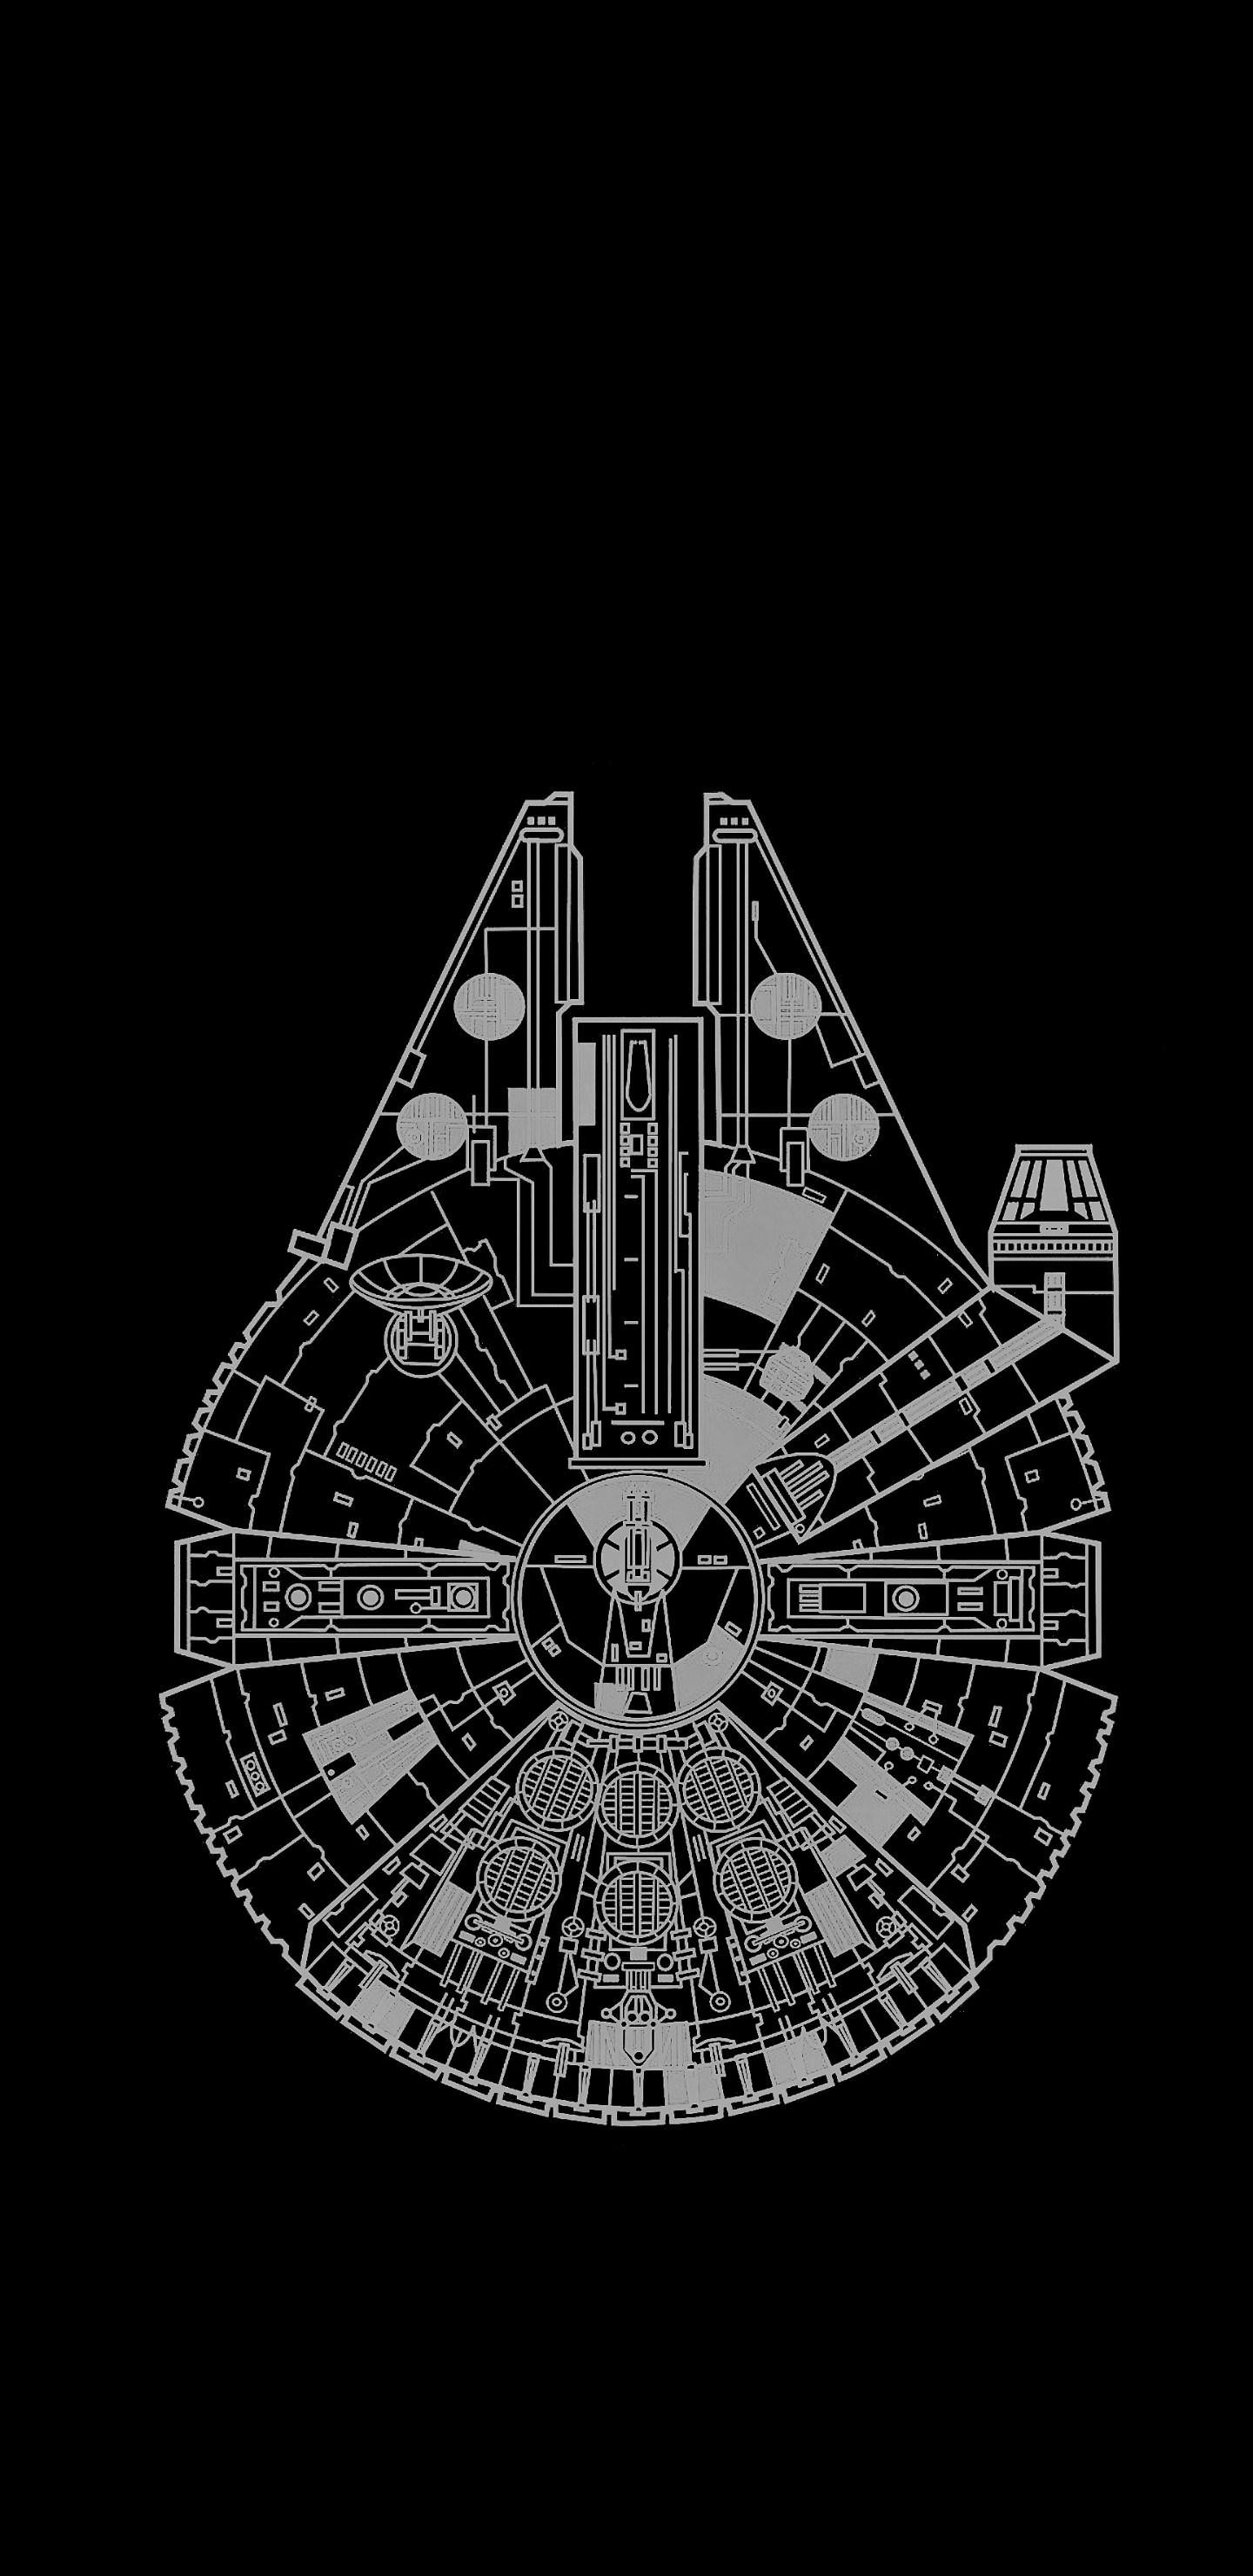 Another OLED Star Wars Wallpaper